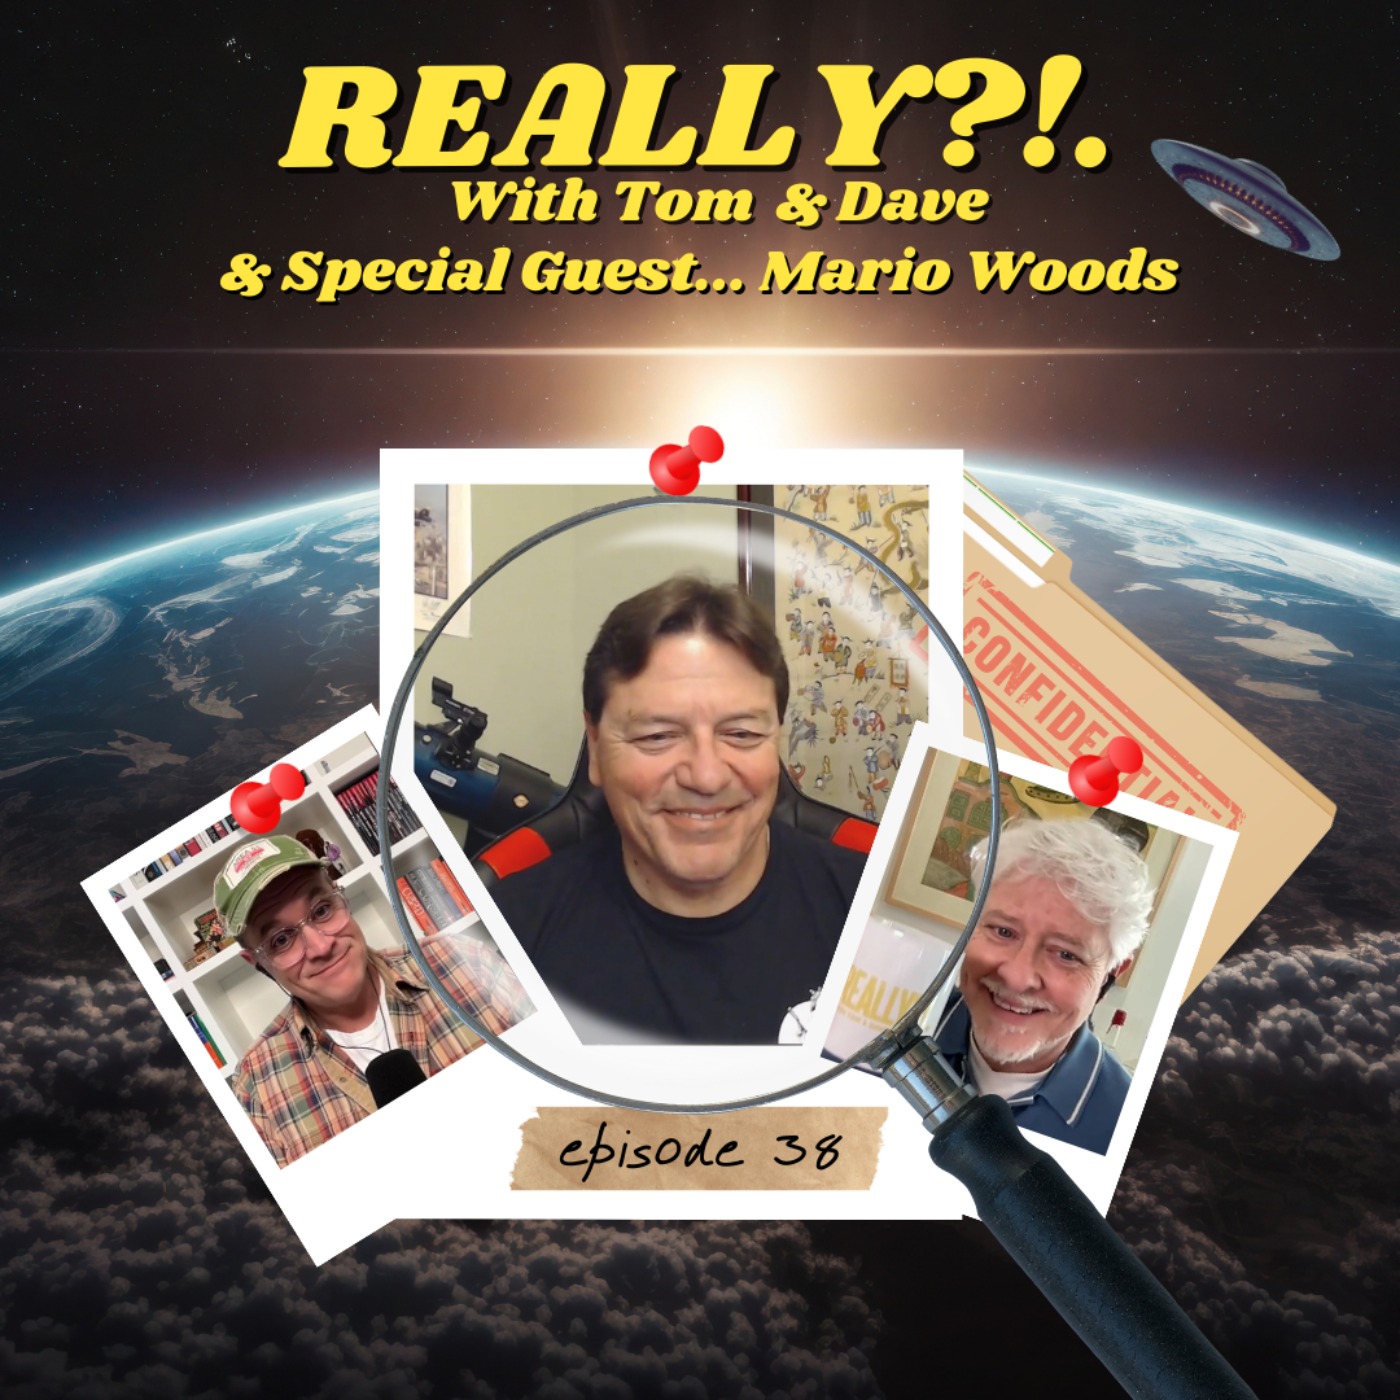 REALLY?!. with Tom and Dave - Mario Woods - Episode 38